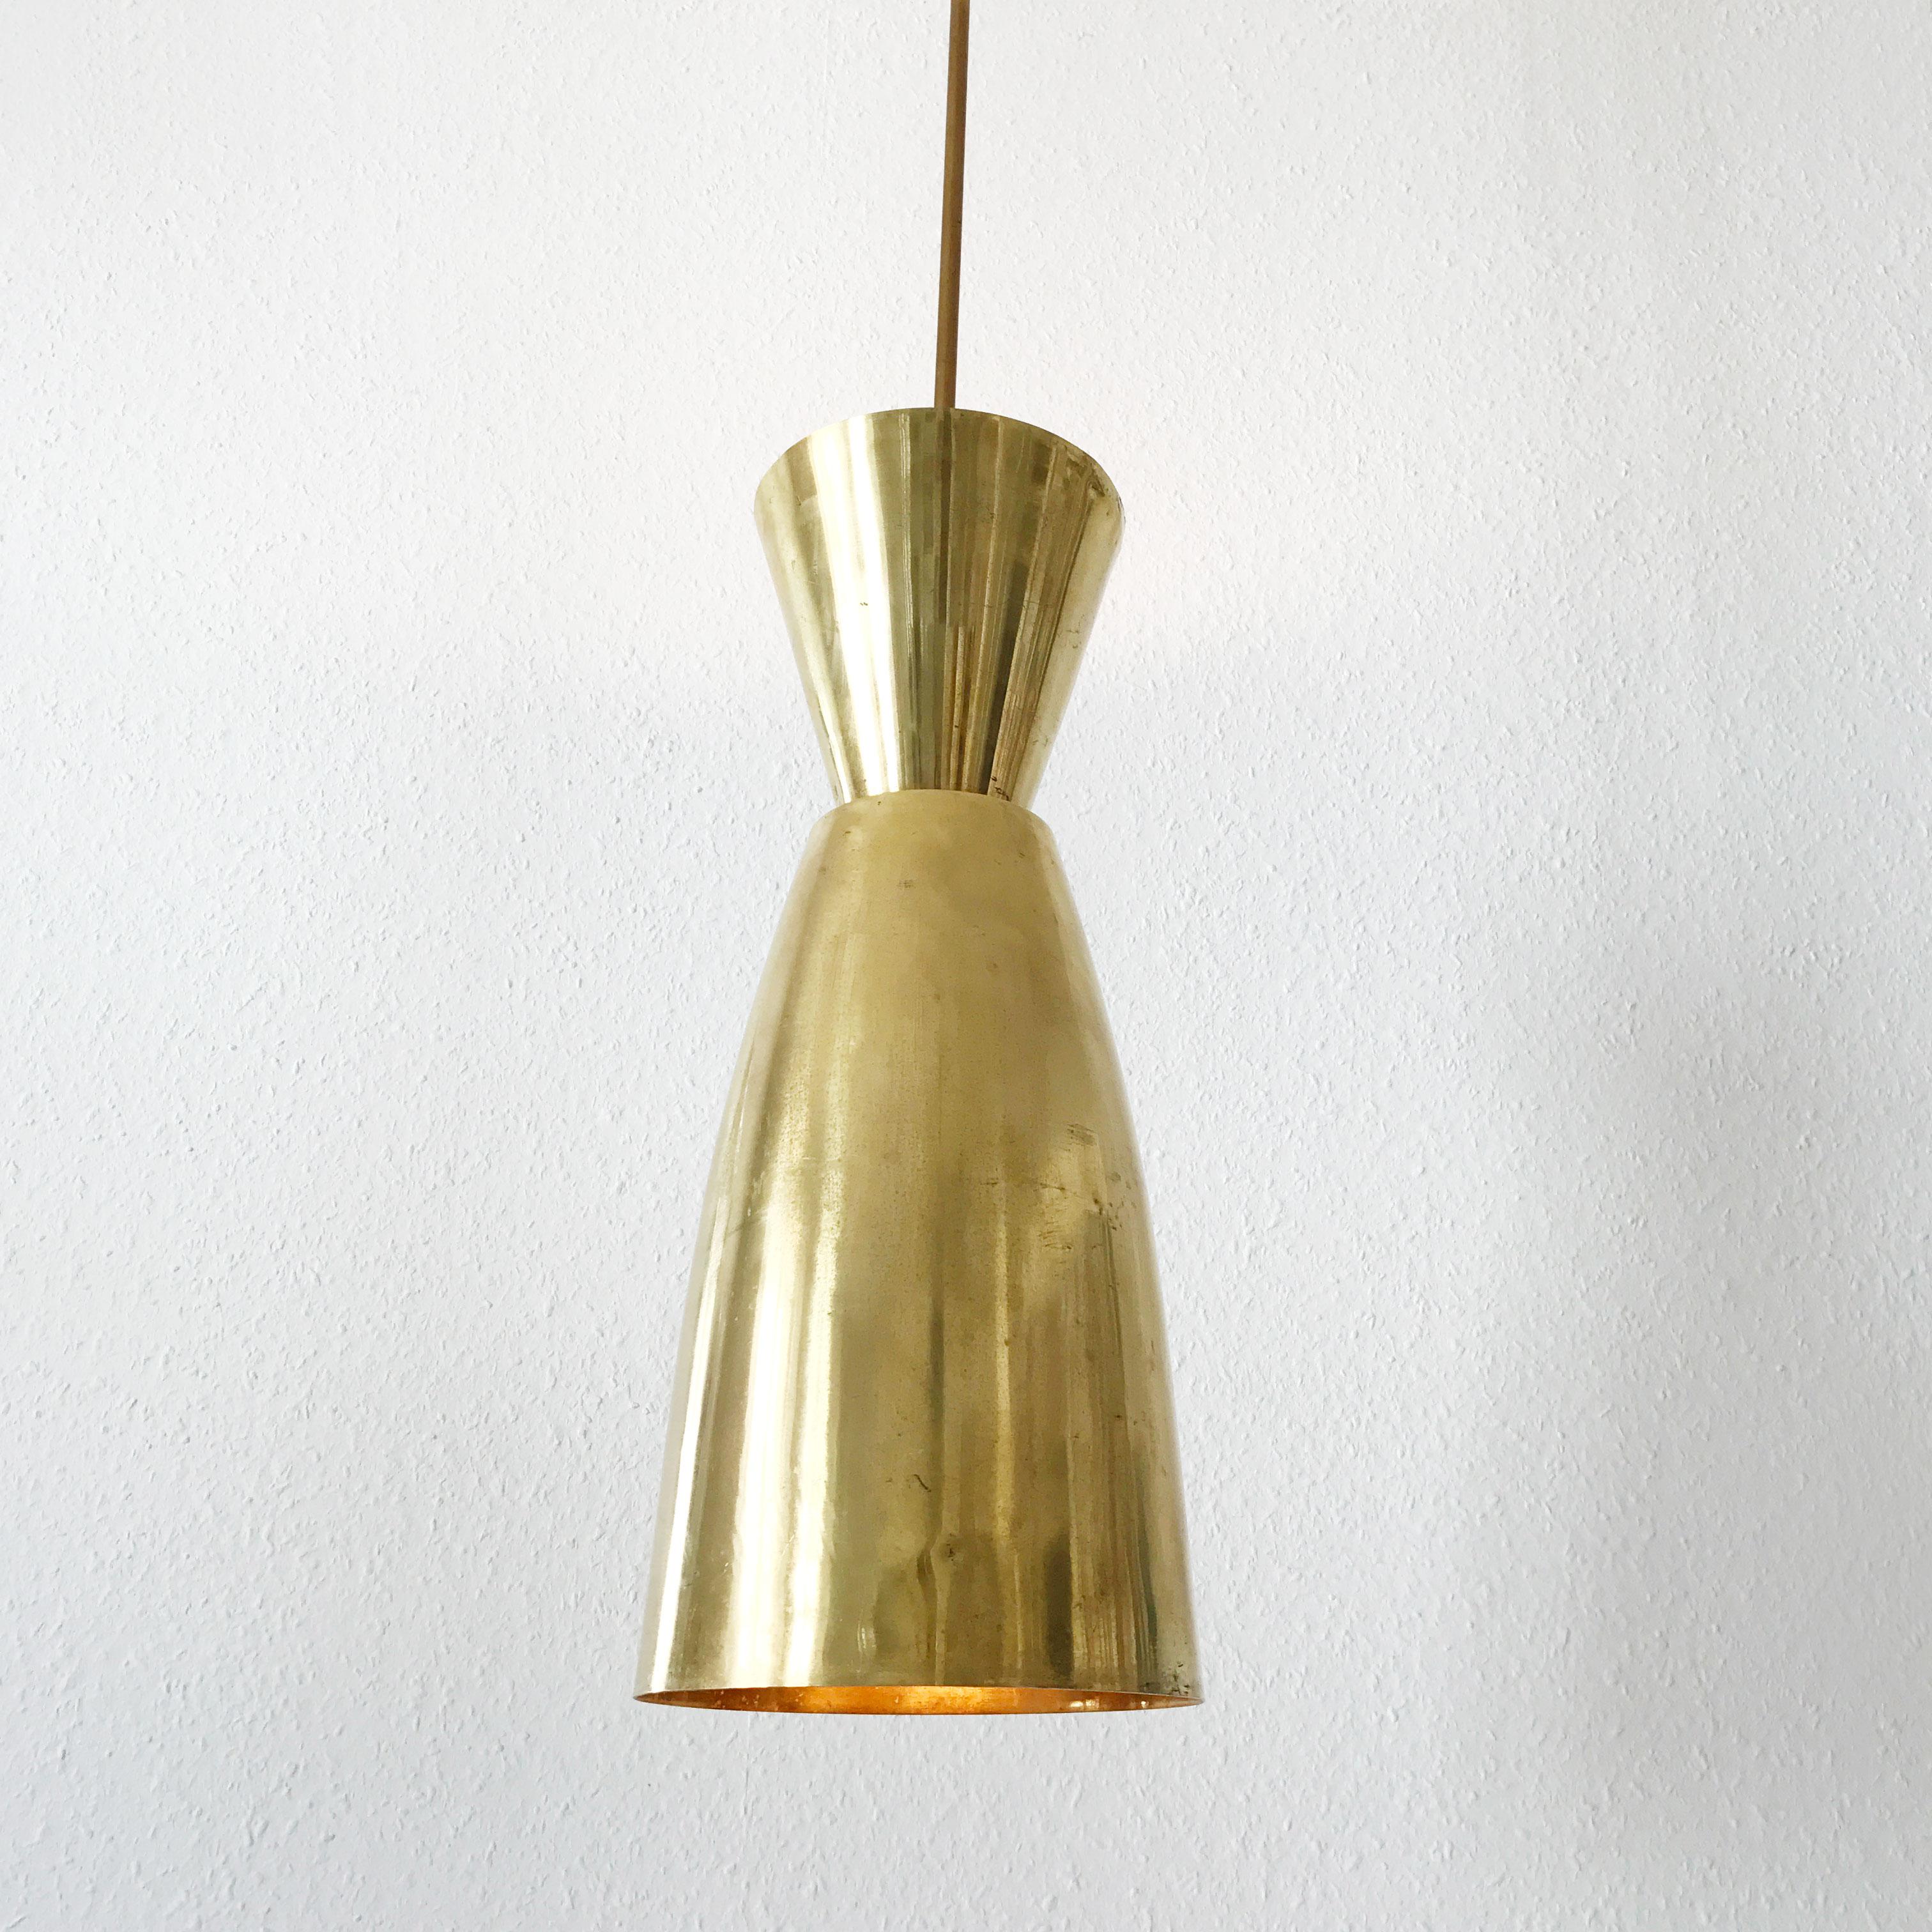 Gorgeous and exceptional Mid-Century Modern diabolo brass pendant lamp. Designed and manufactured in Germany, 1950s.

The lamp is executed in brass and has 1 x E27 (bottom) and 2 x E14 (top) Edison screw fit sockets. It is wired, and in working